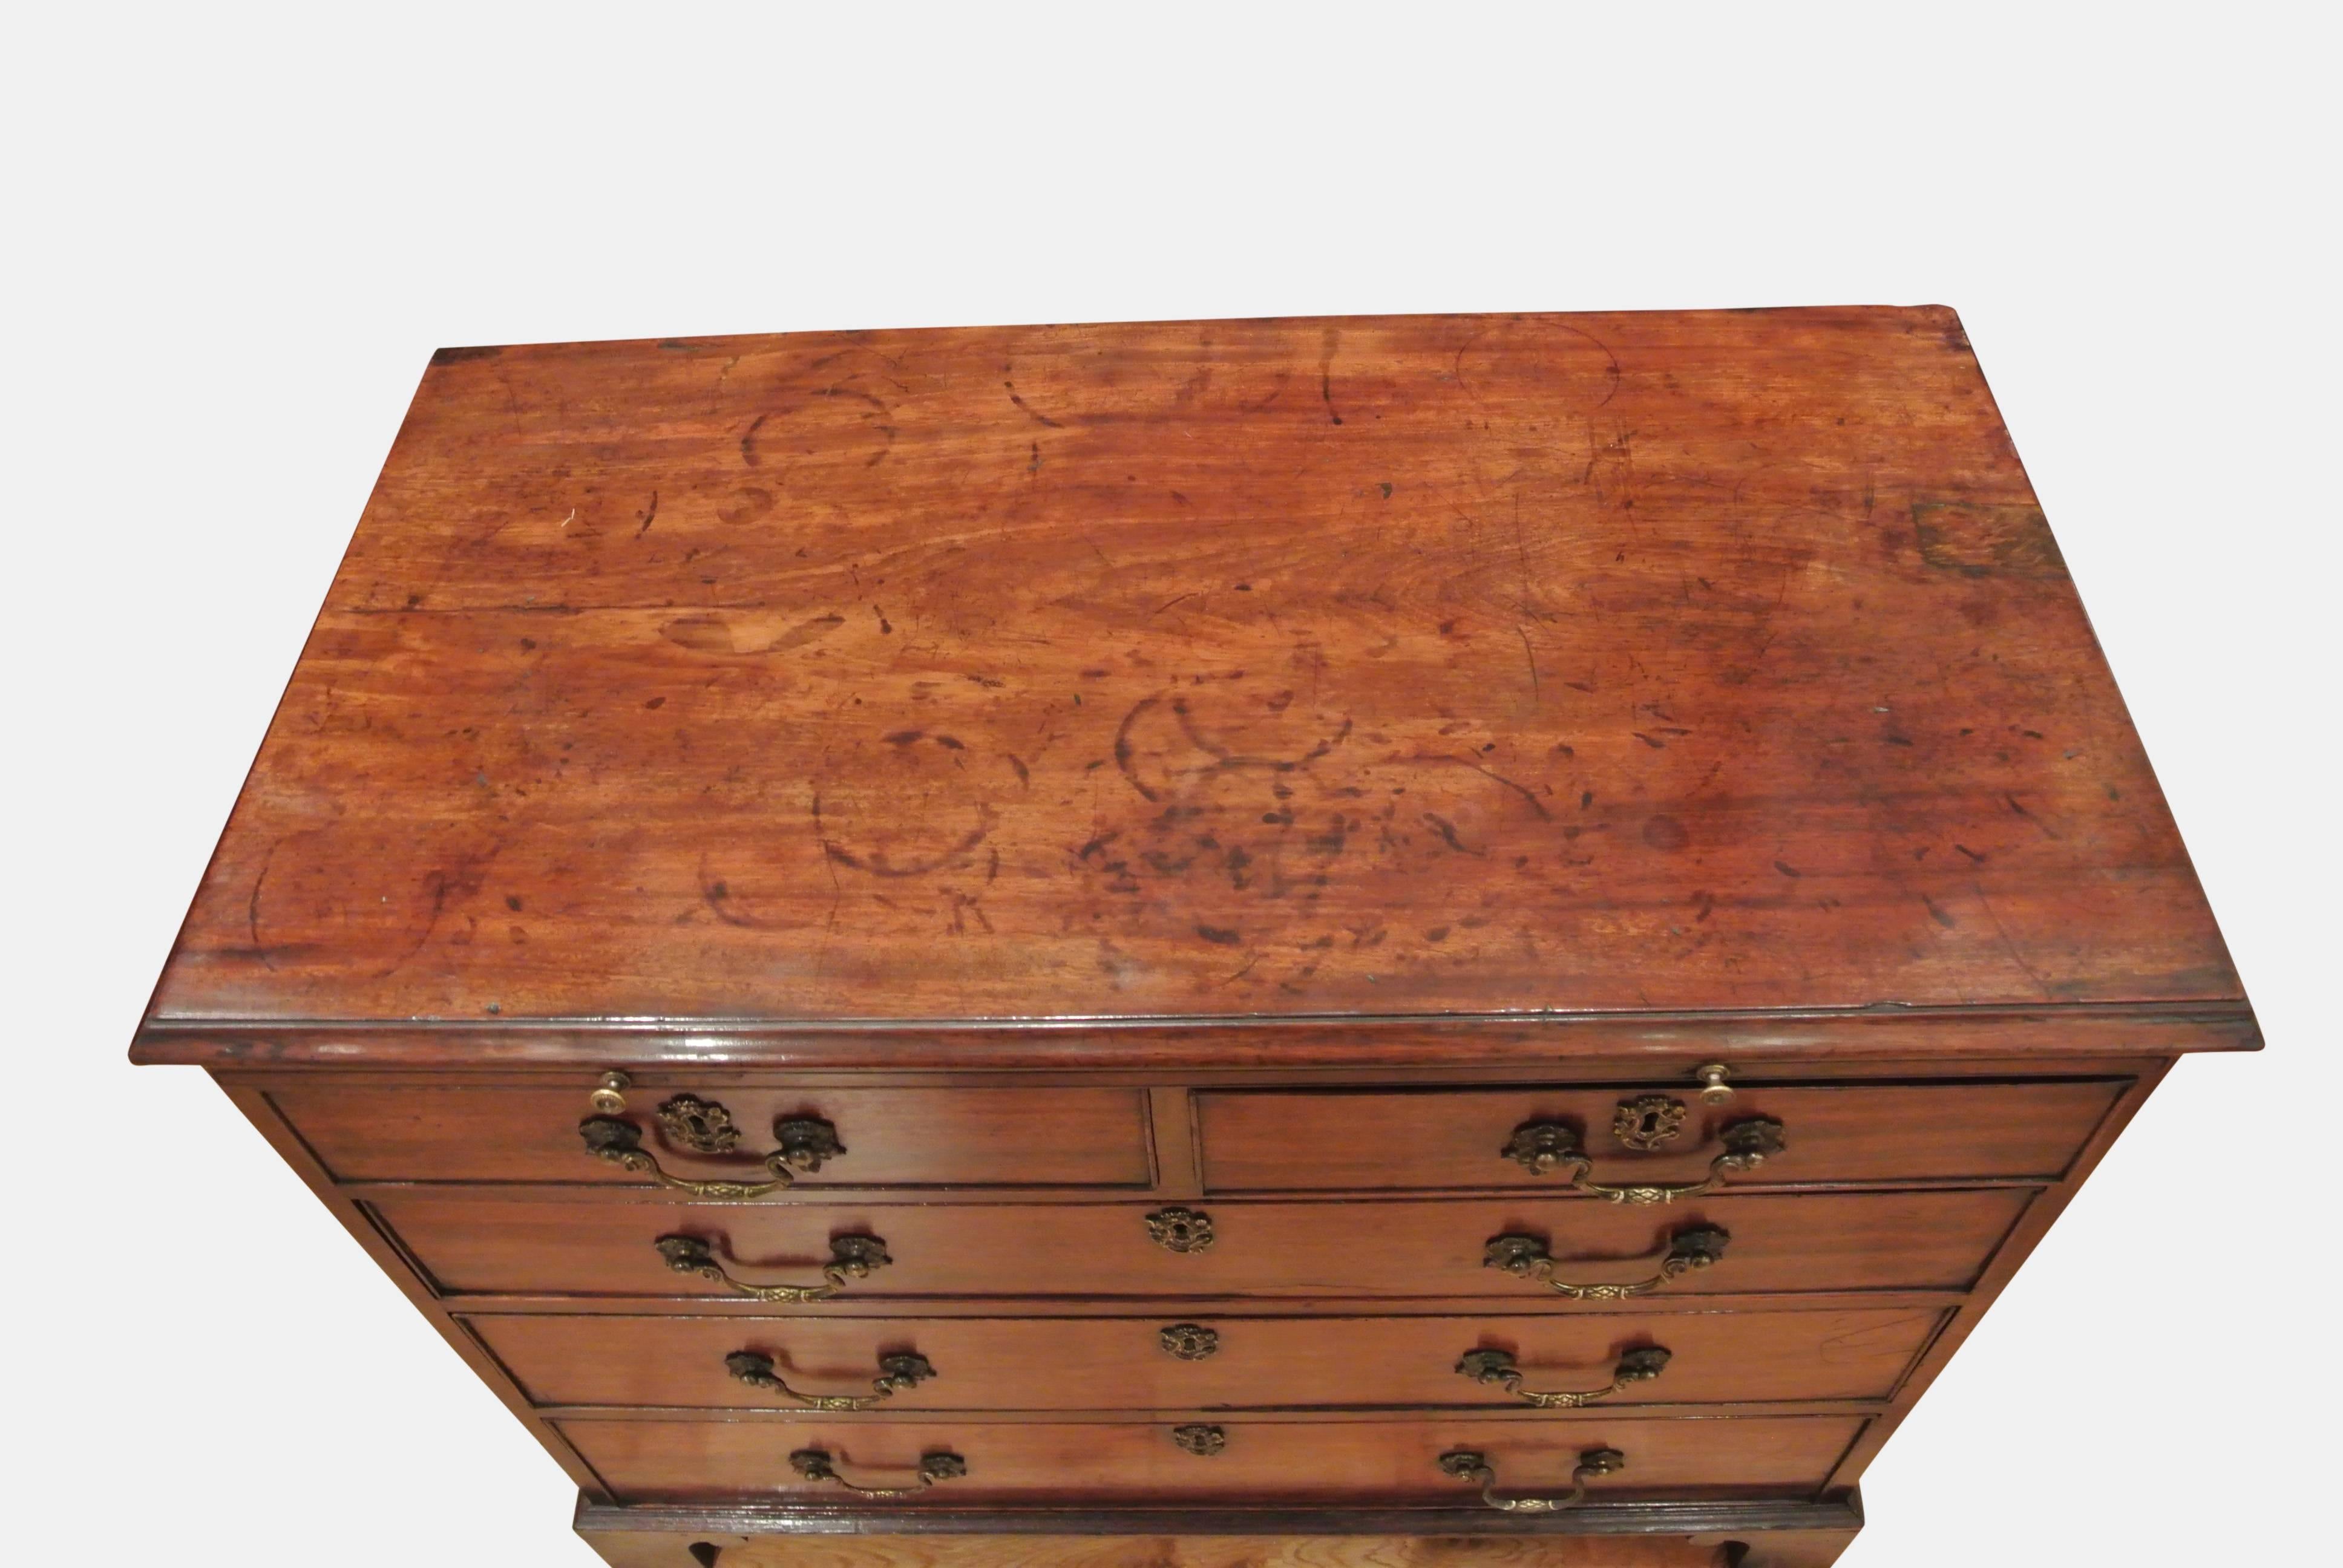 English George III Chest of Drawers